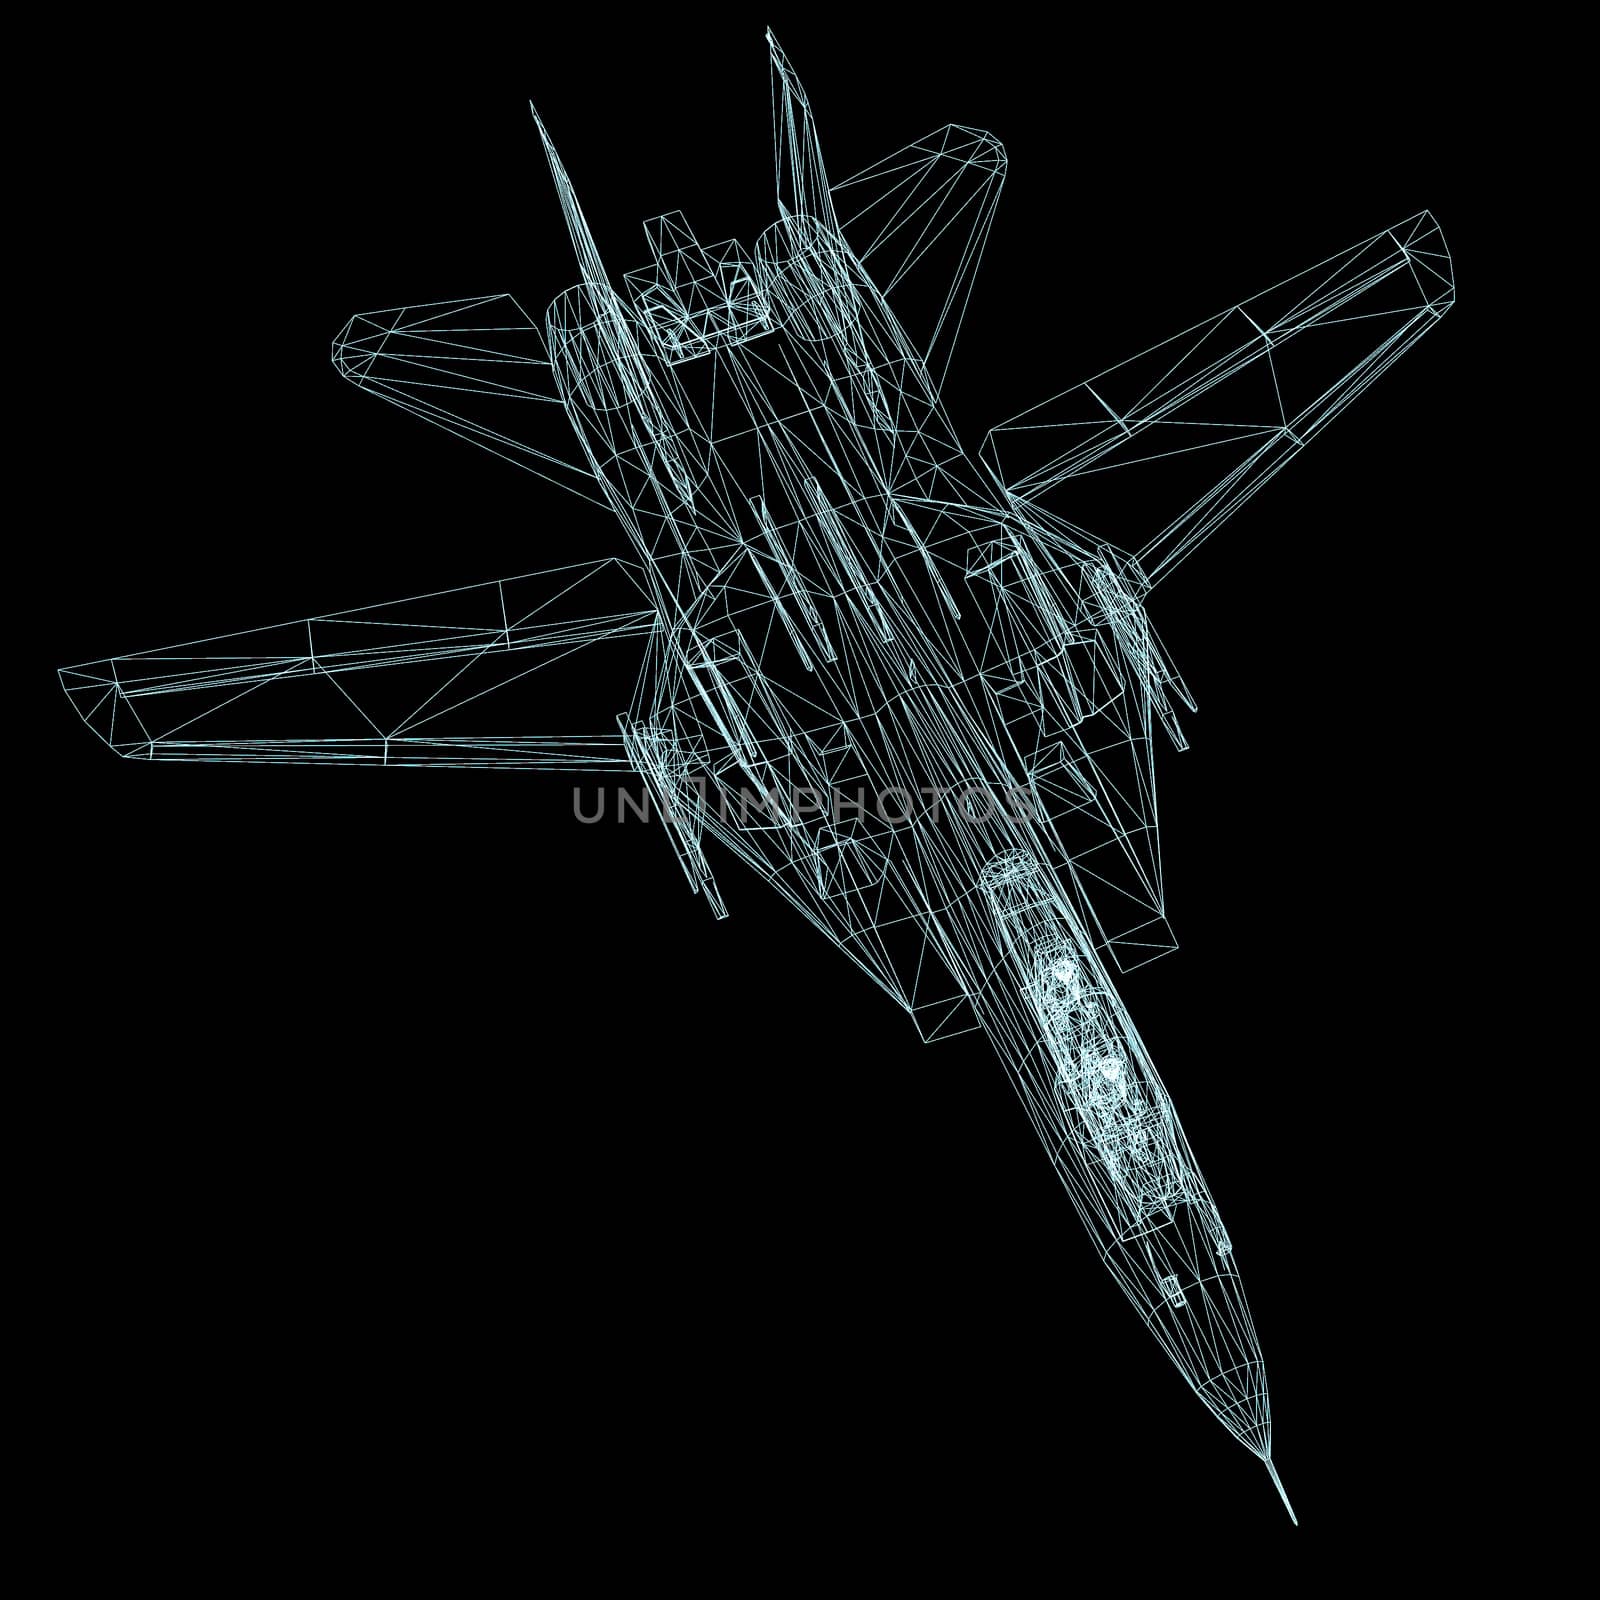 3D model of airplane isolated on BLACK background